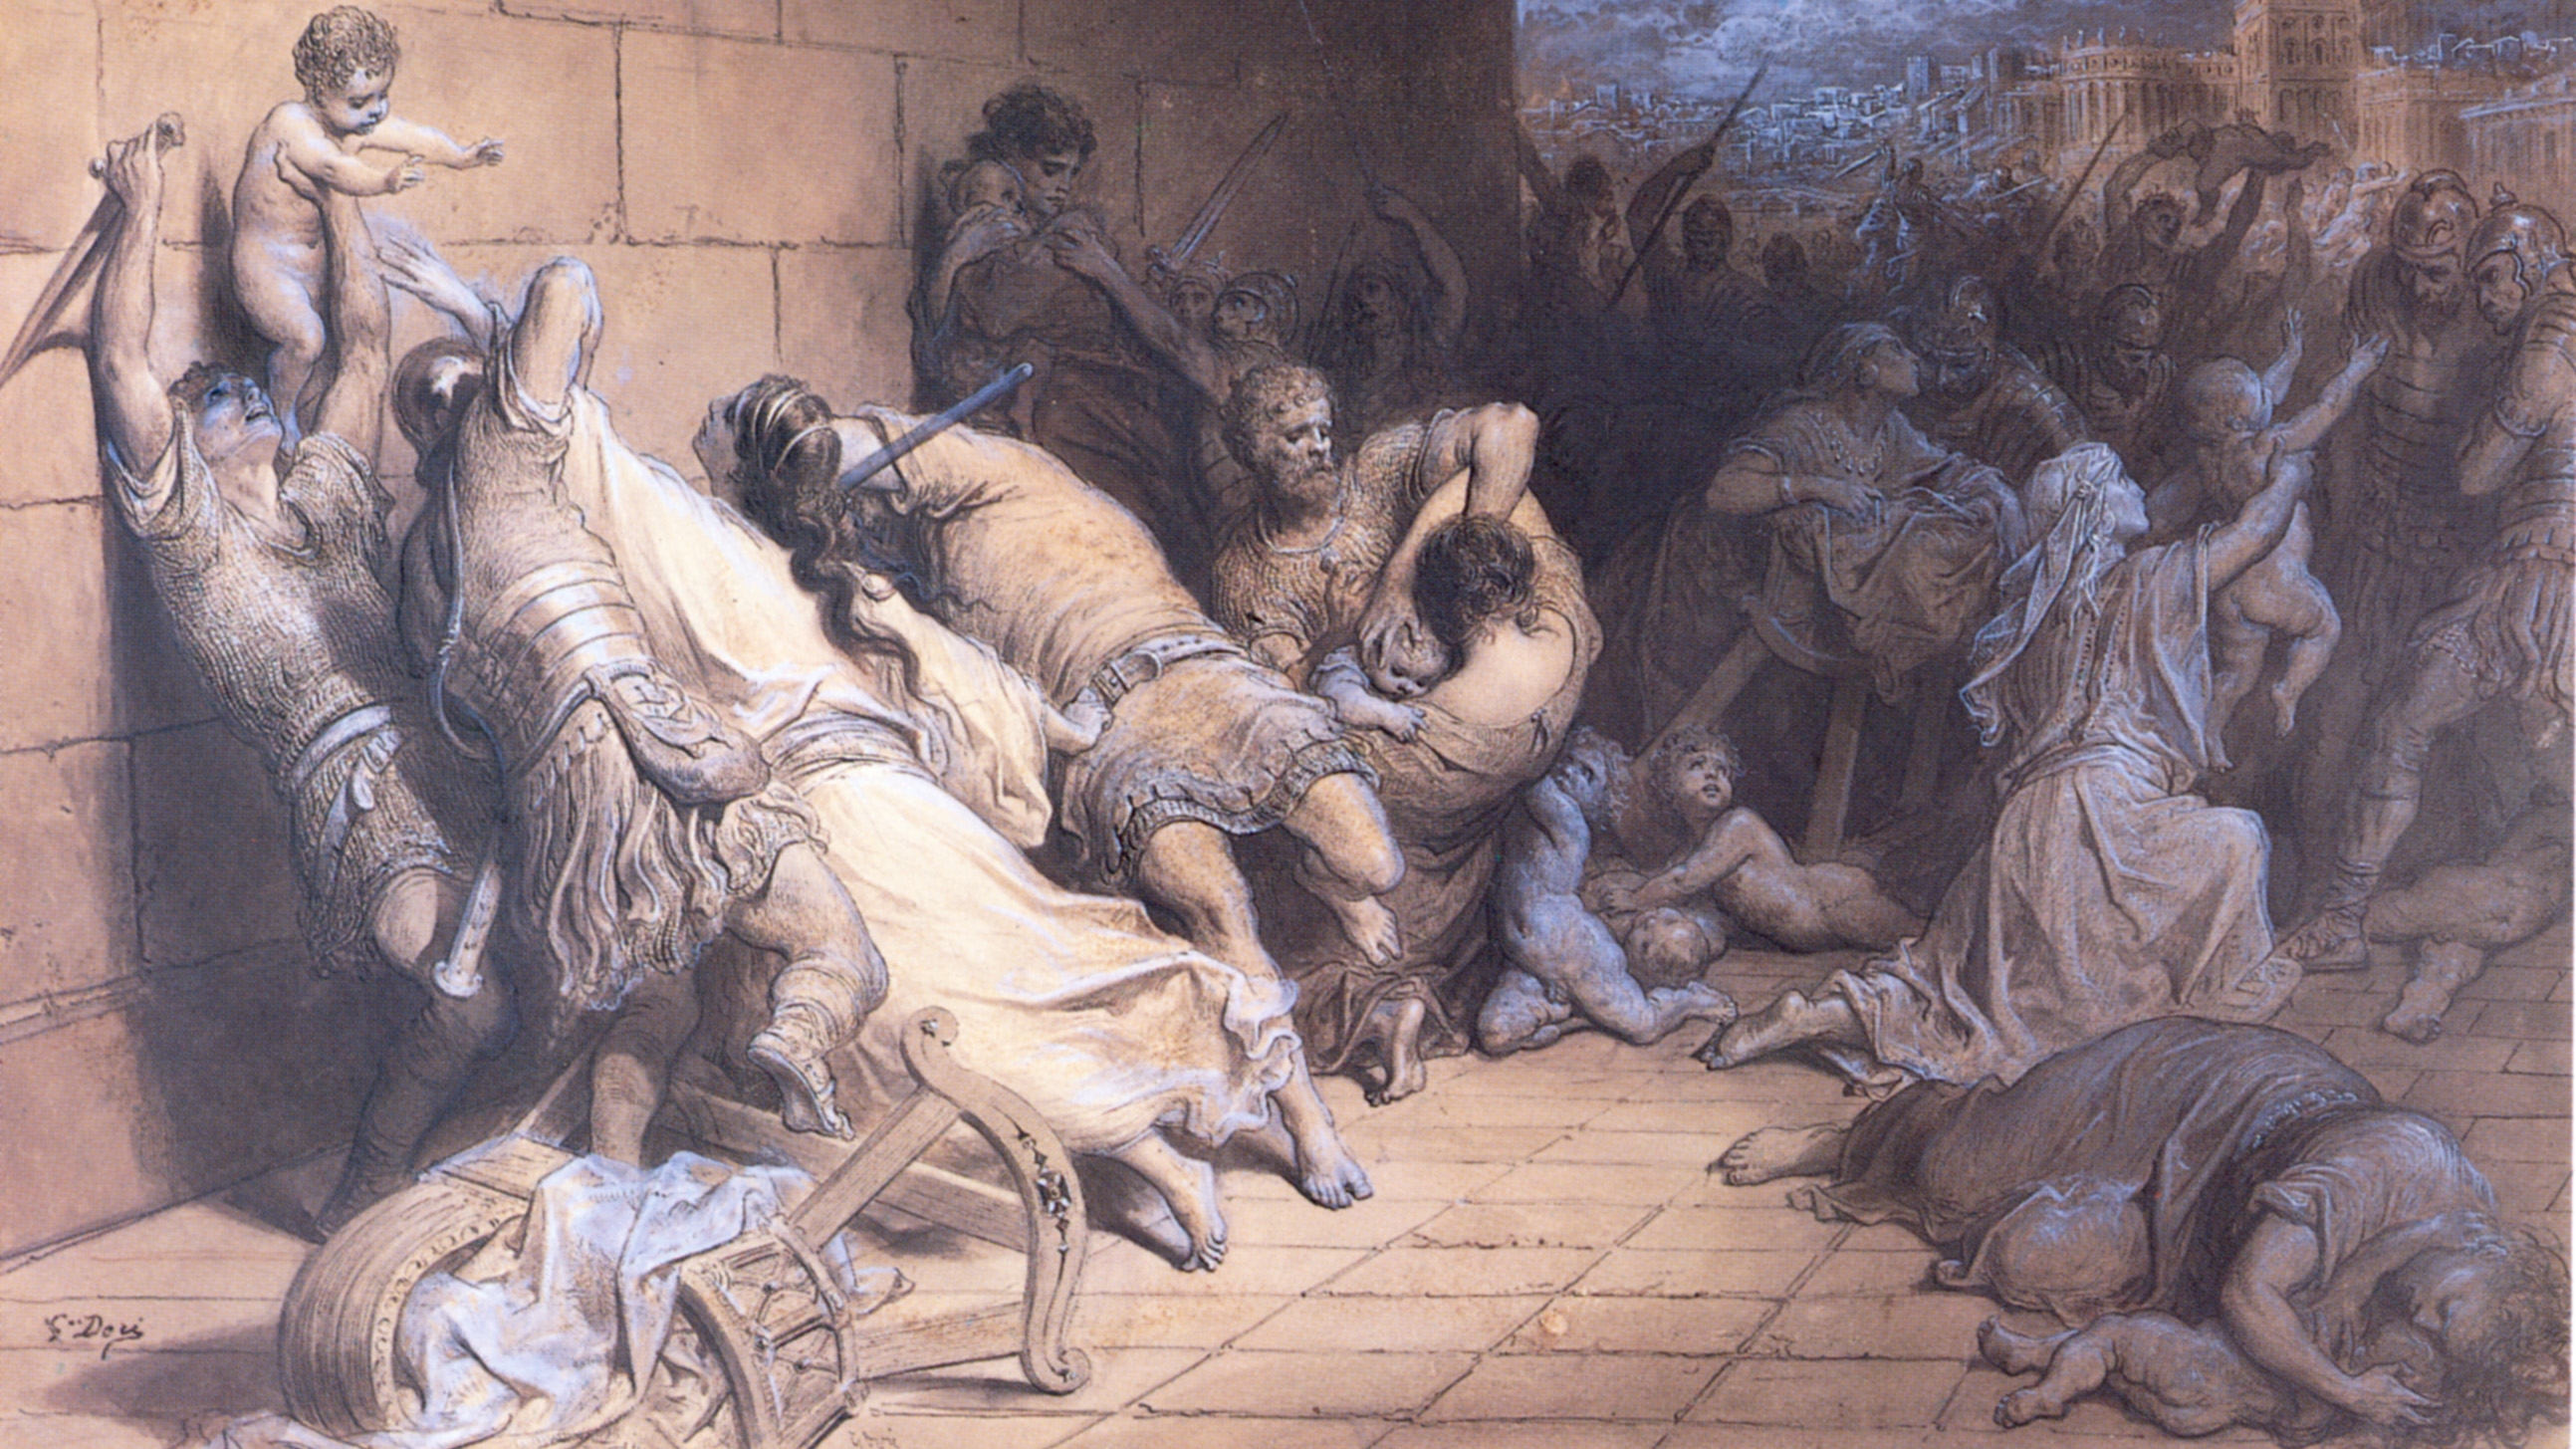 The Martyrdom of the Holy Innocents by Gustave Doré